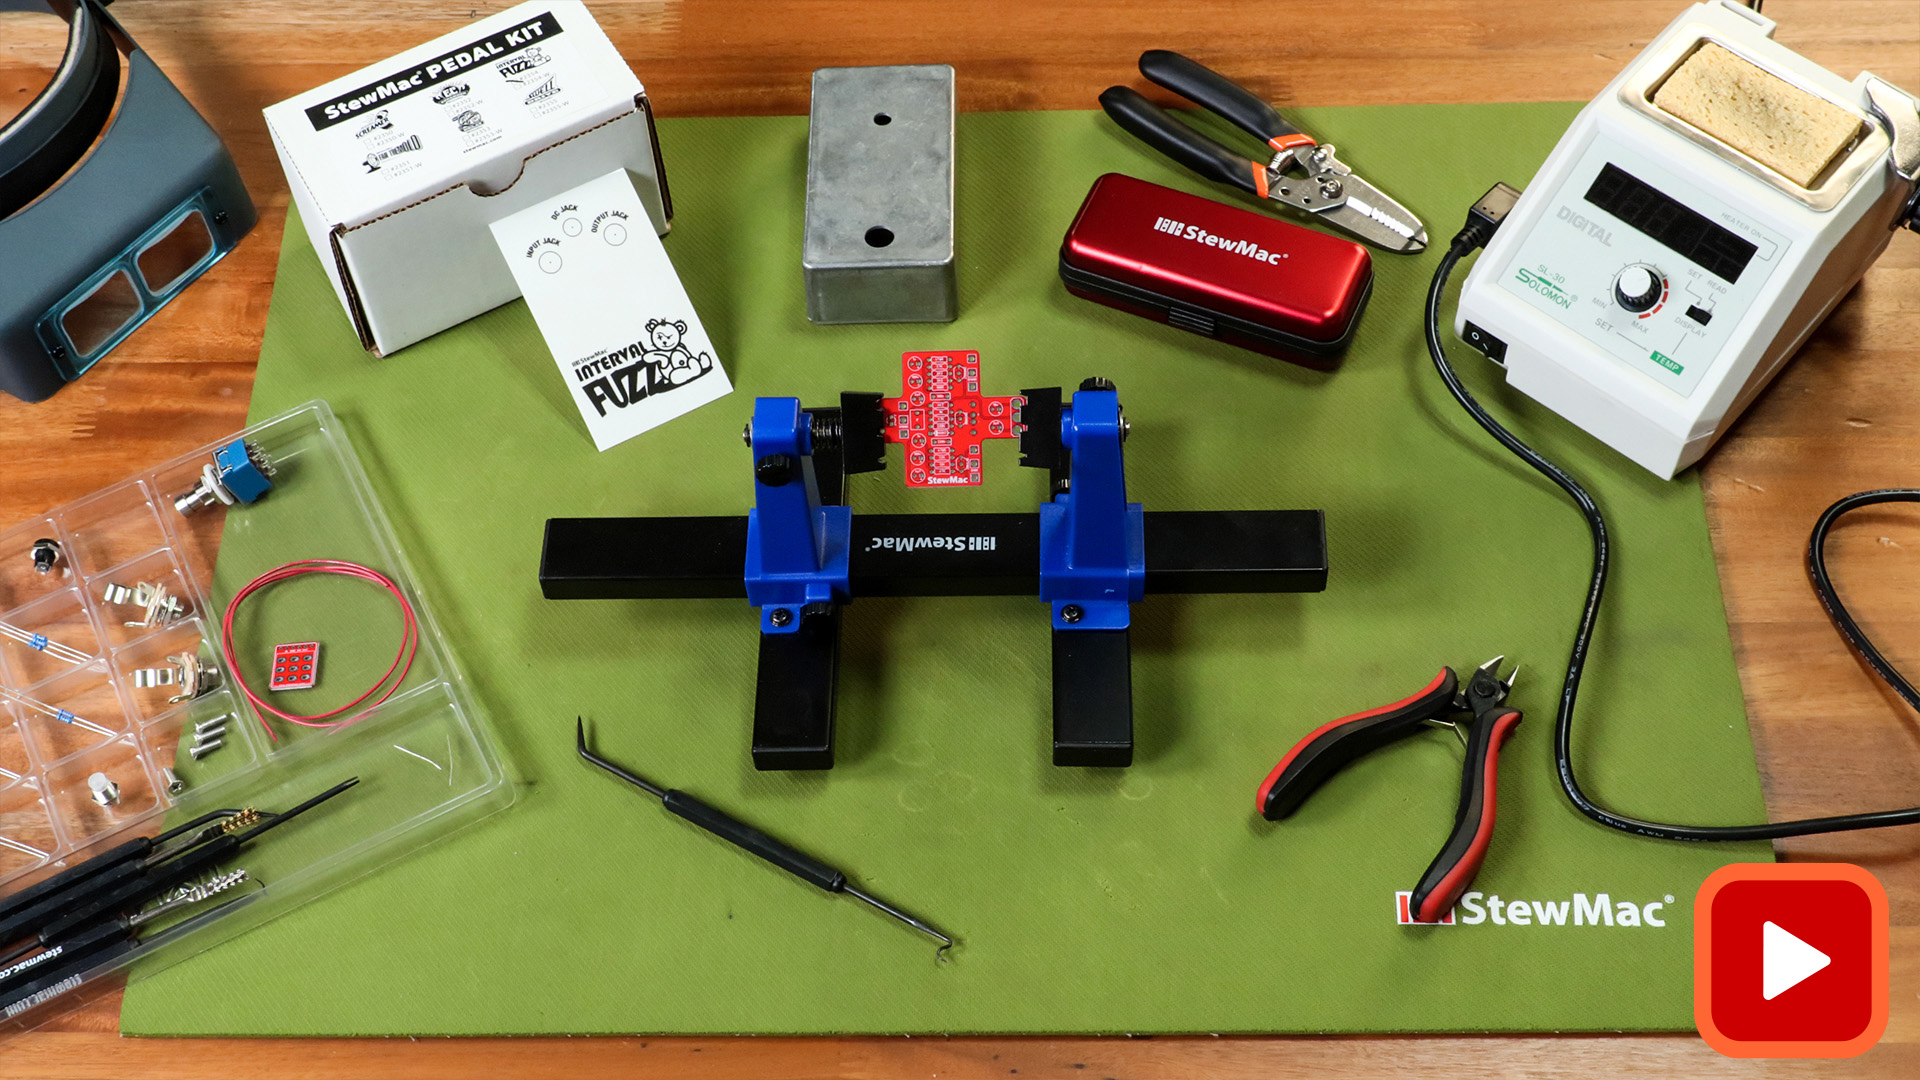 Pedal kit parts, soldering equipment, and tools on a bench 